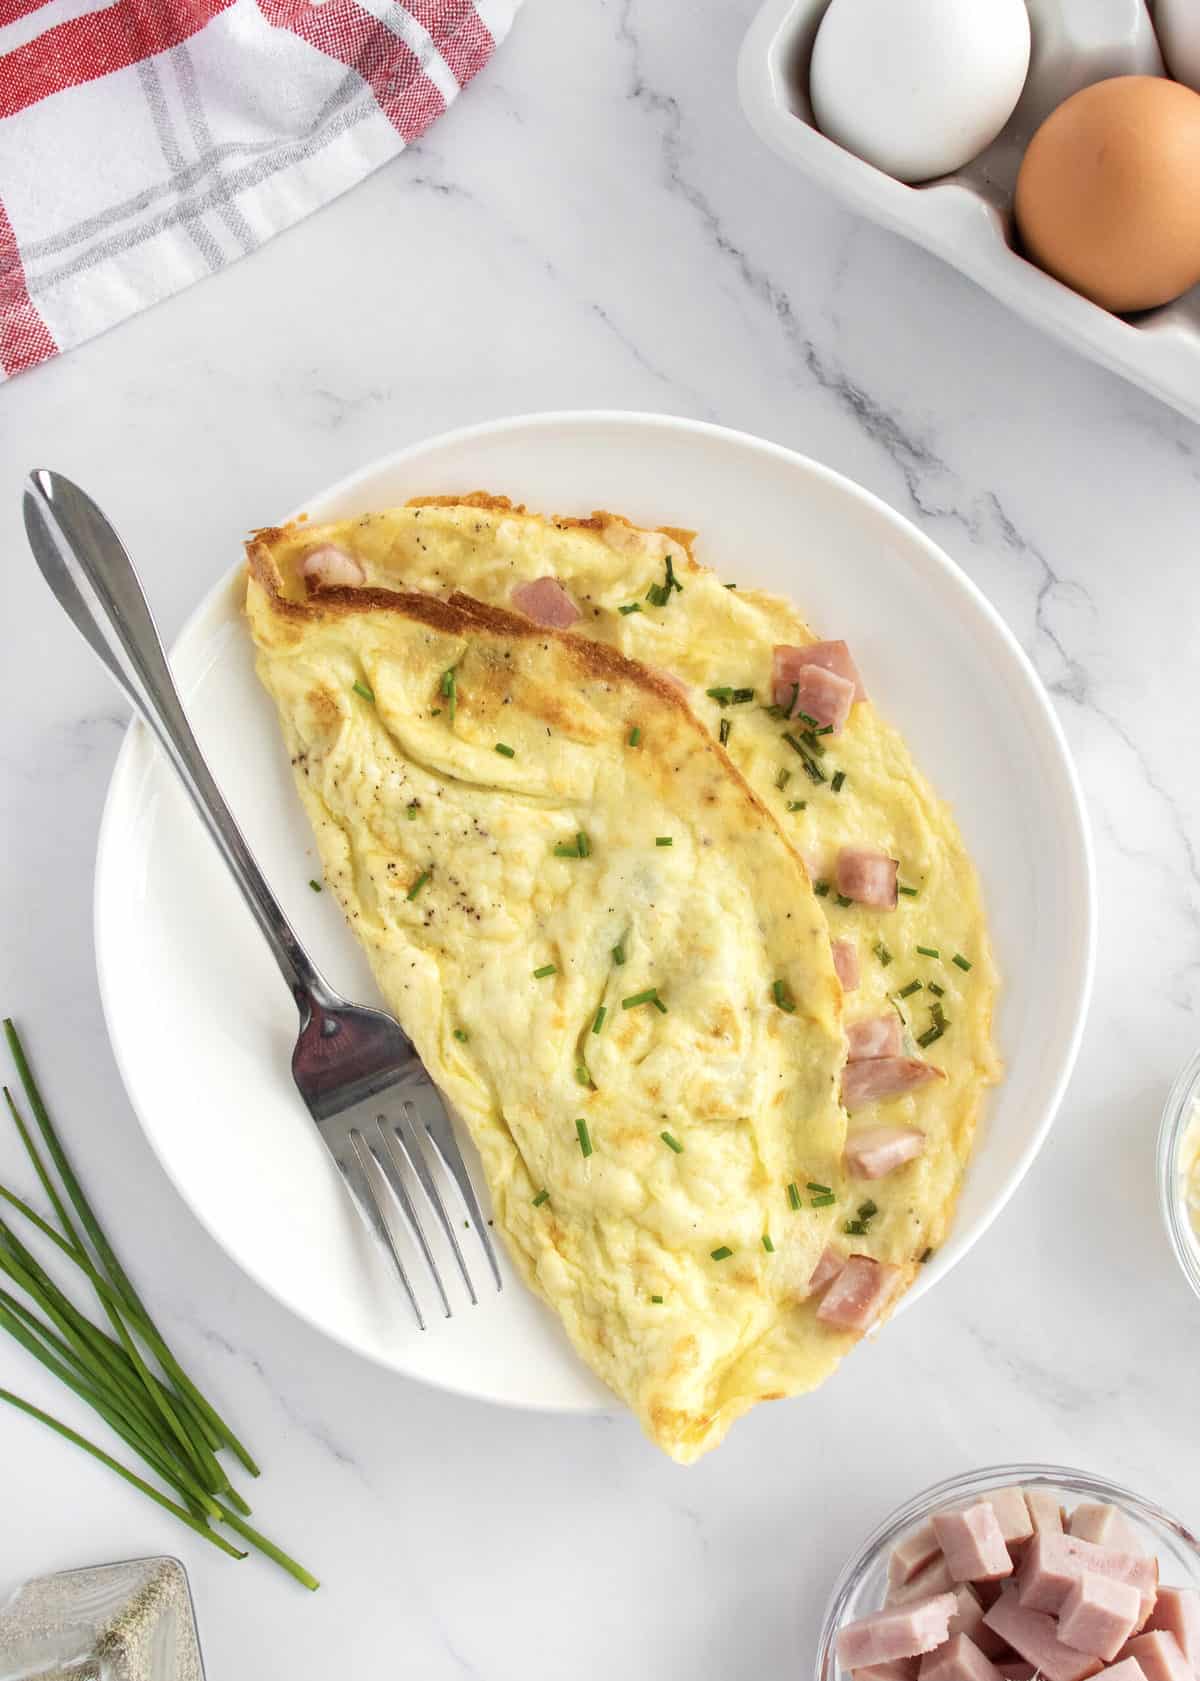 Basics by The BakerMama: How to Make an Omelet